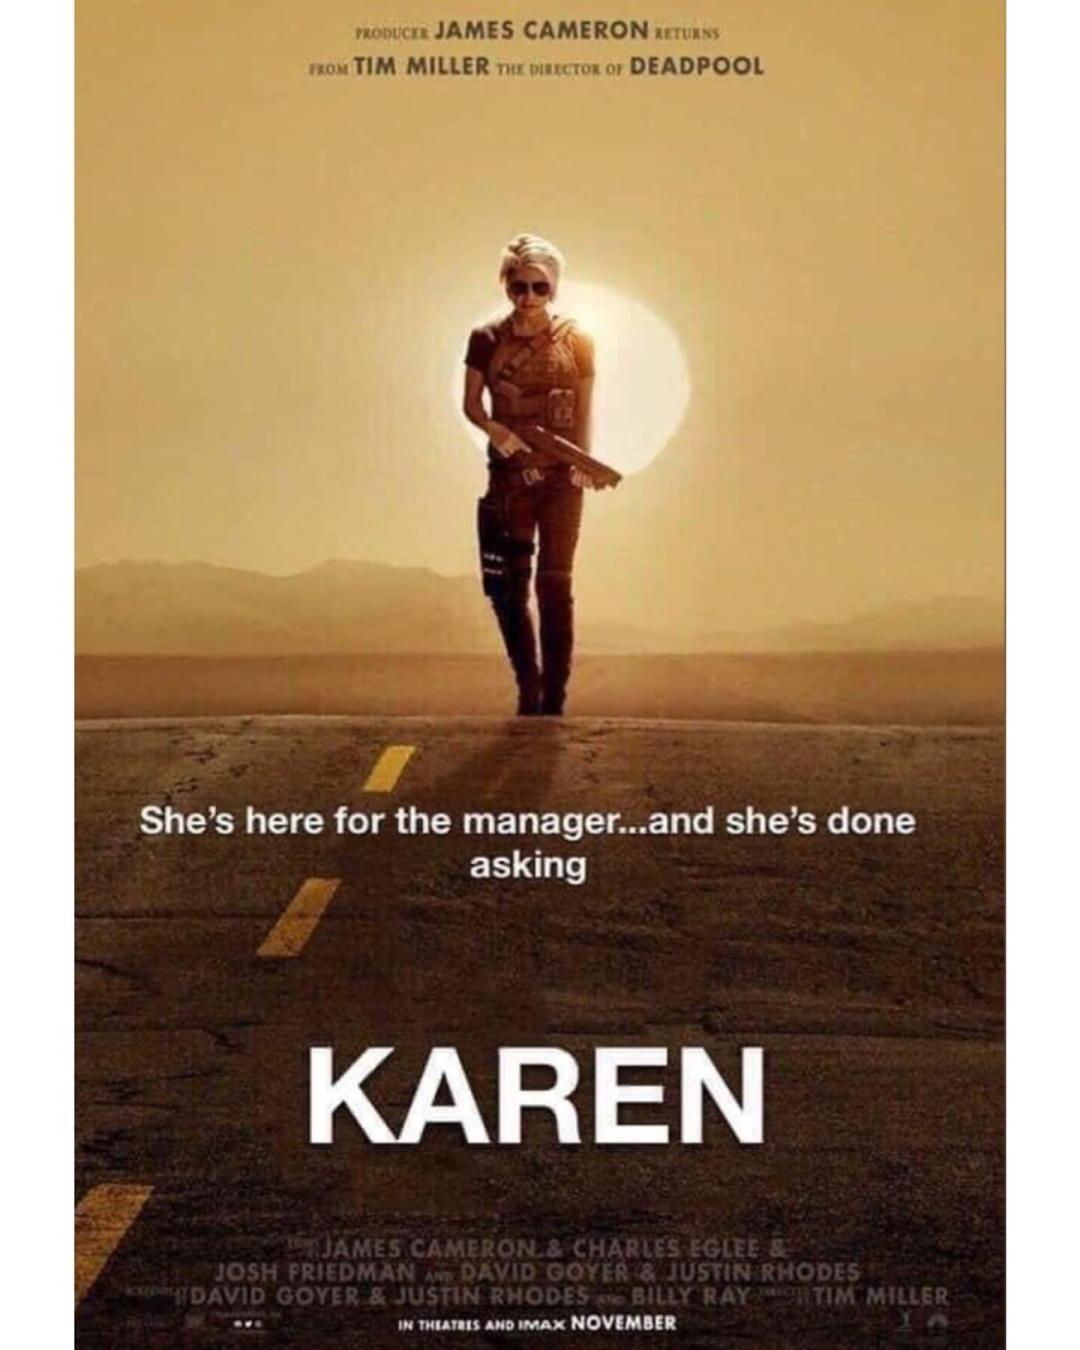 karen movie poster shes here for the manager 